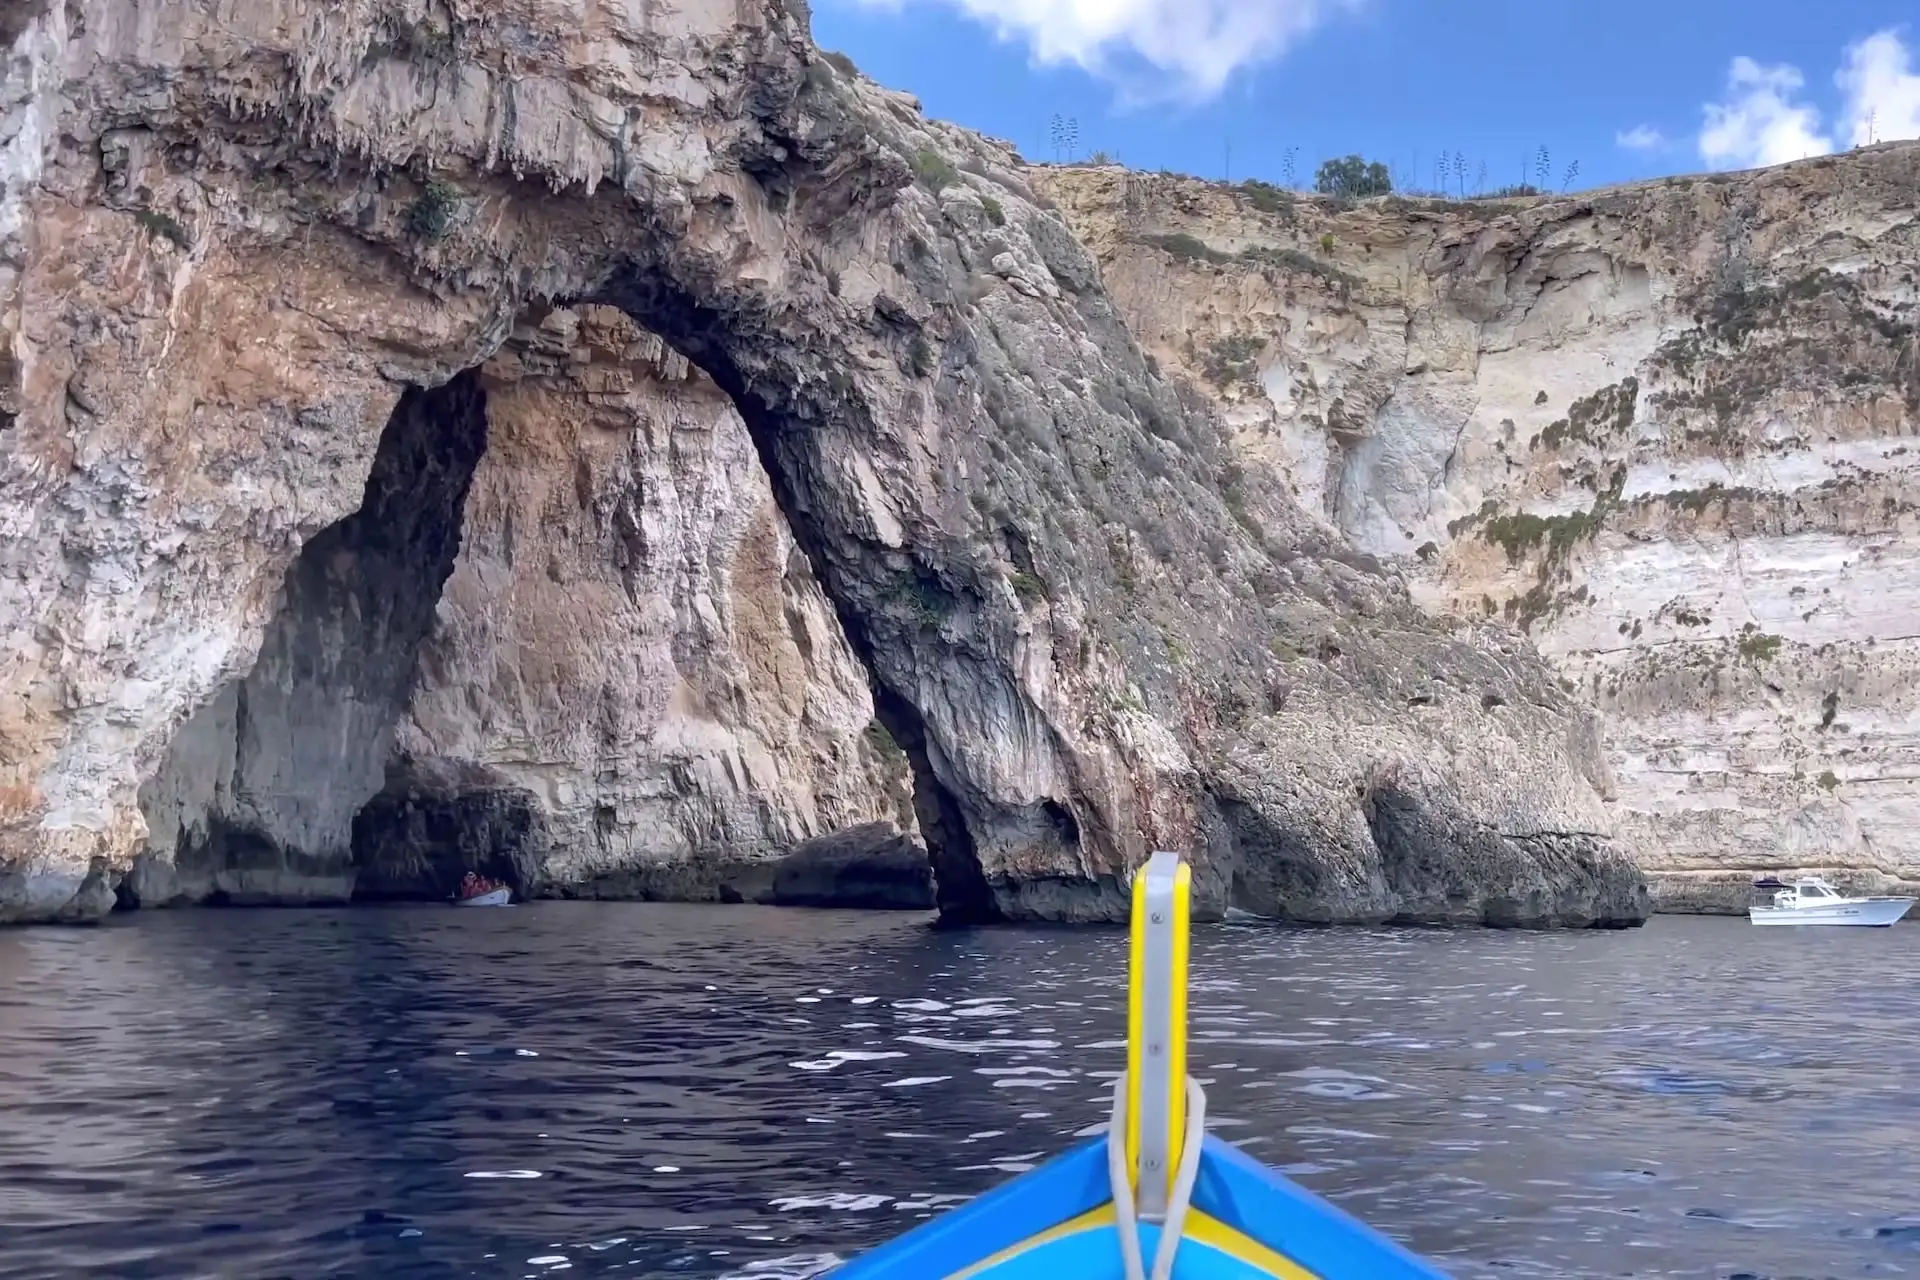 Blue Grotto Arch in Malta viewed from a boat